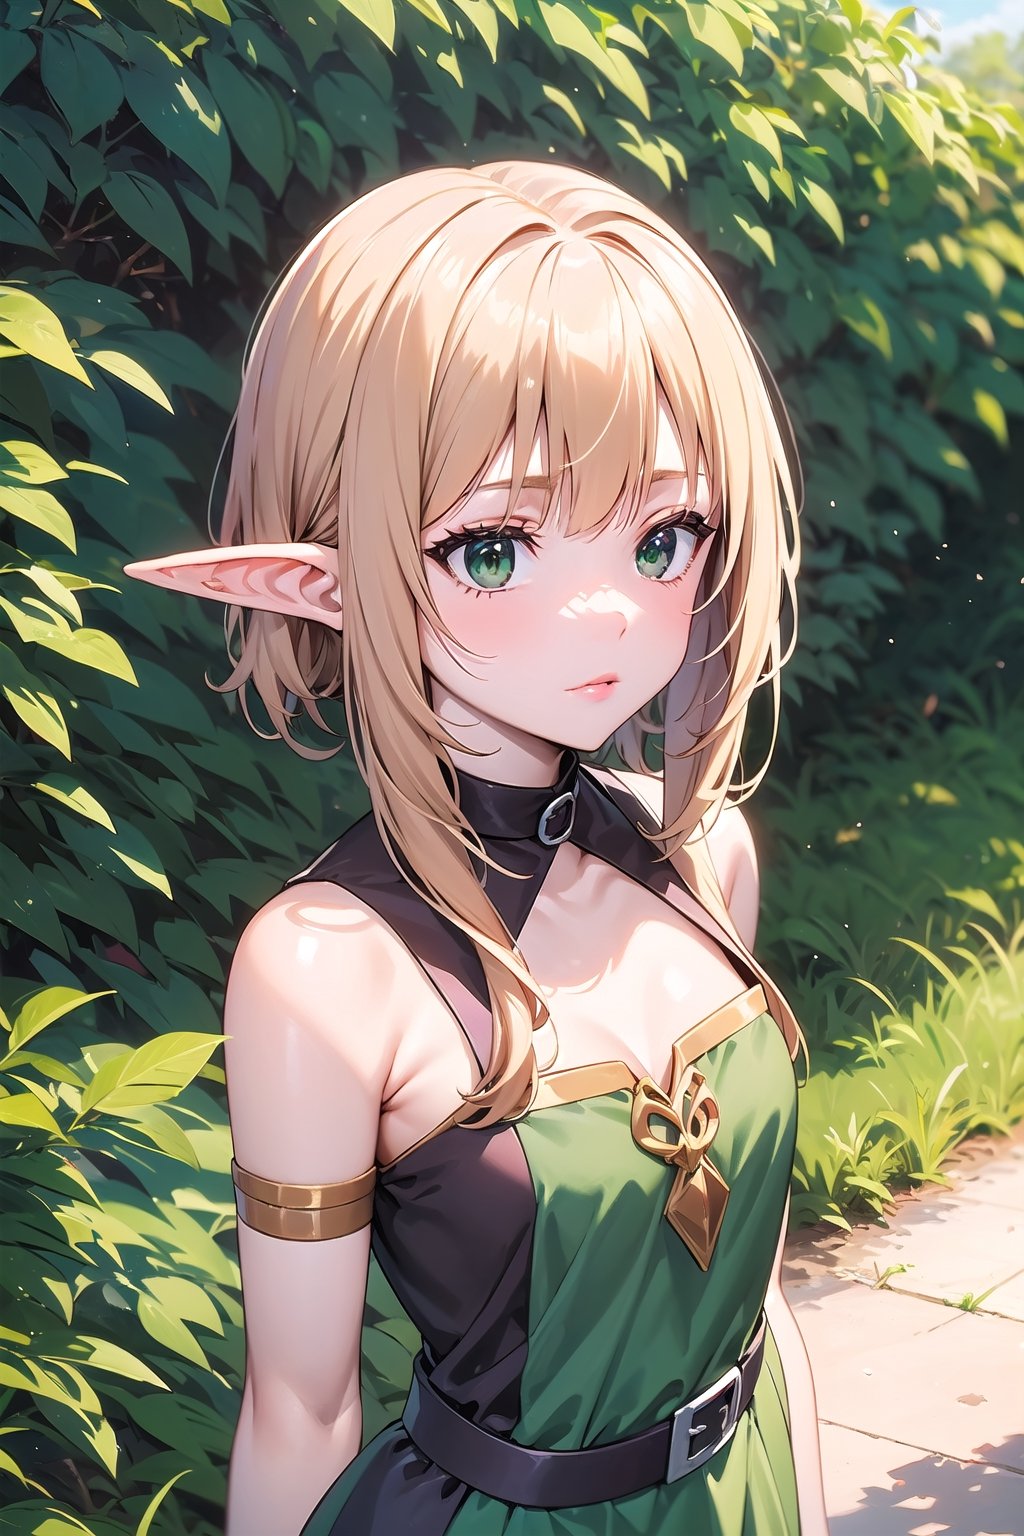 a half-human, half-elf girl, with white skin, green eyes, and wearing a long dress and a bow.